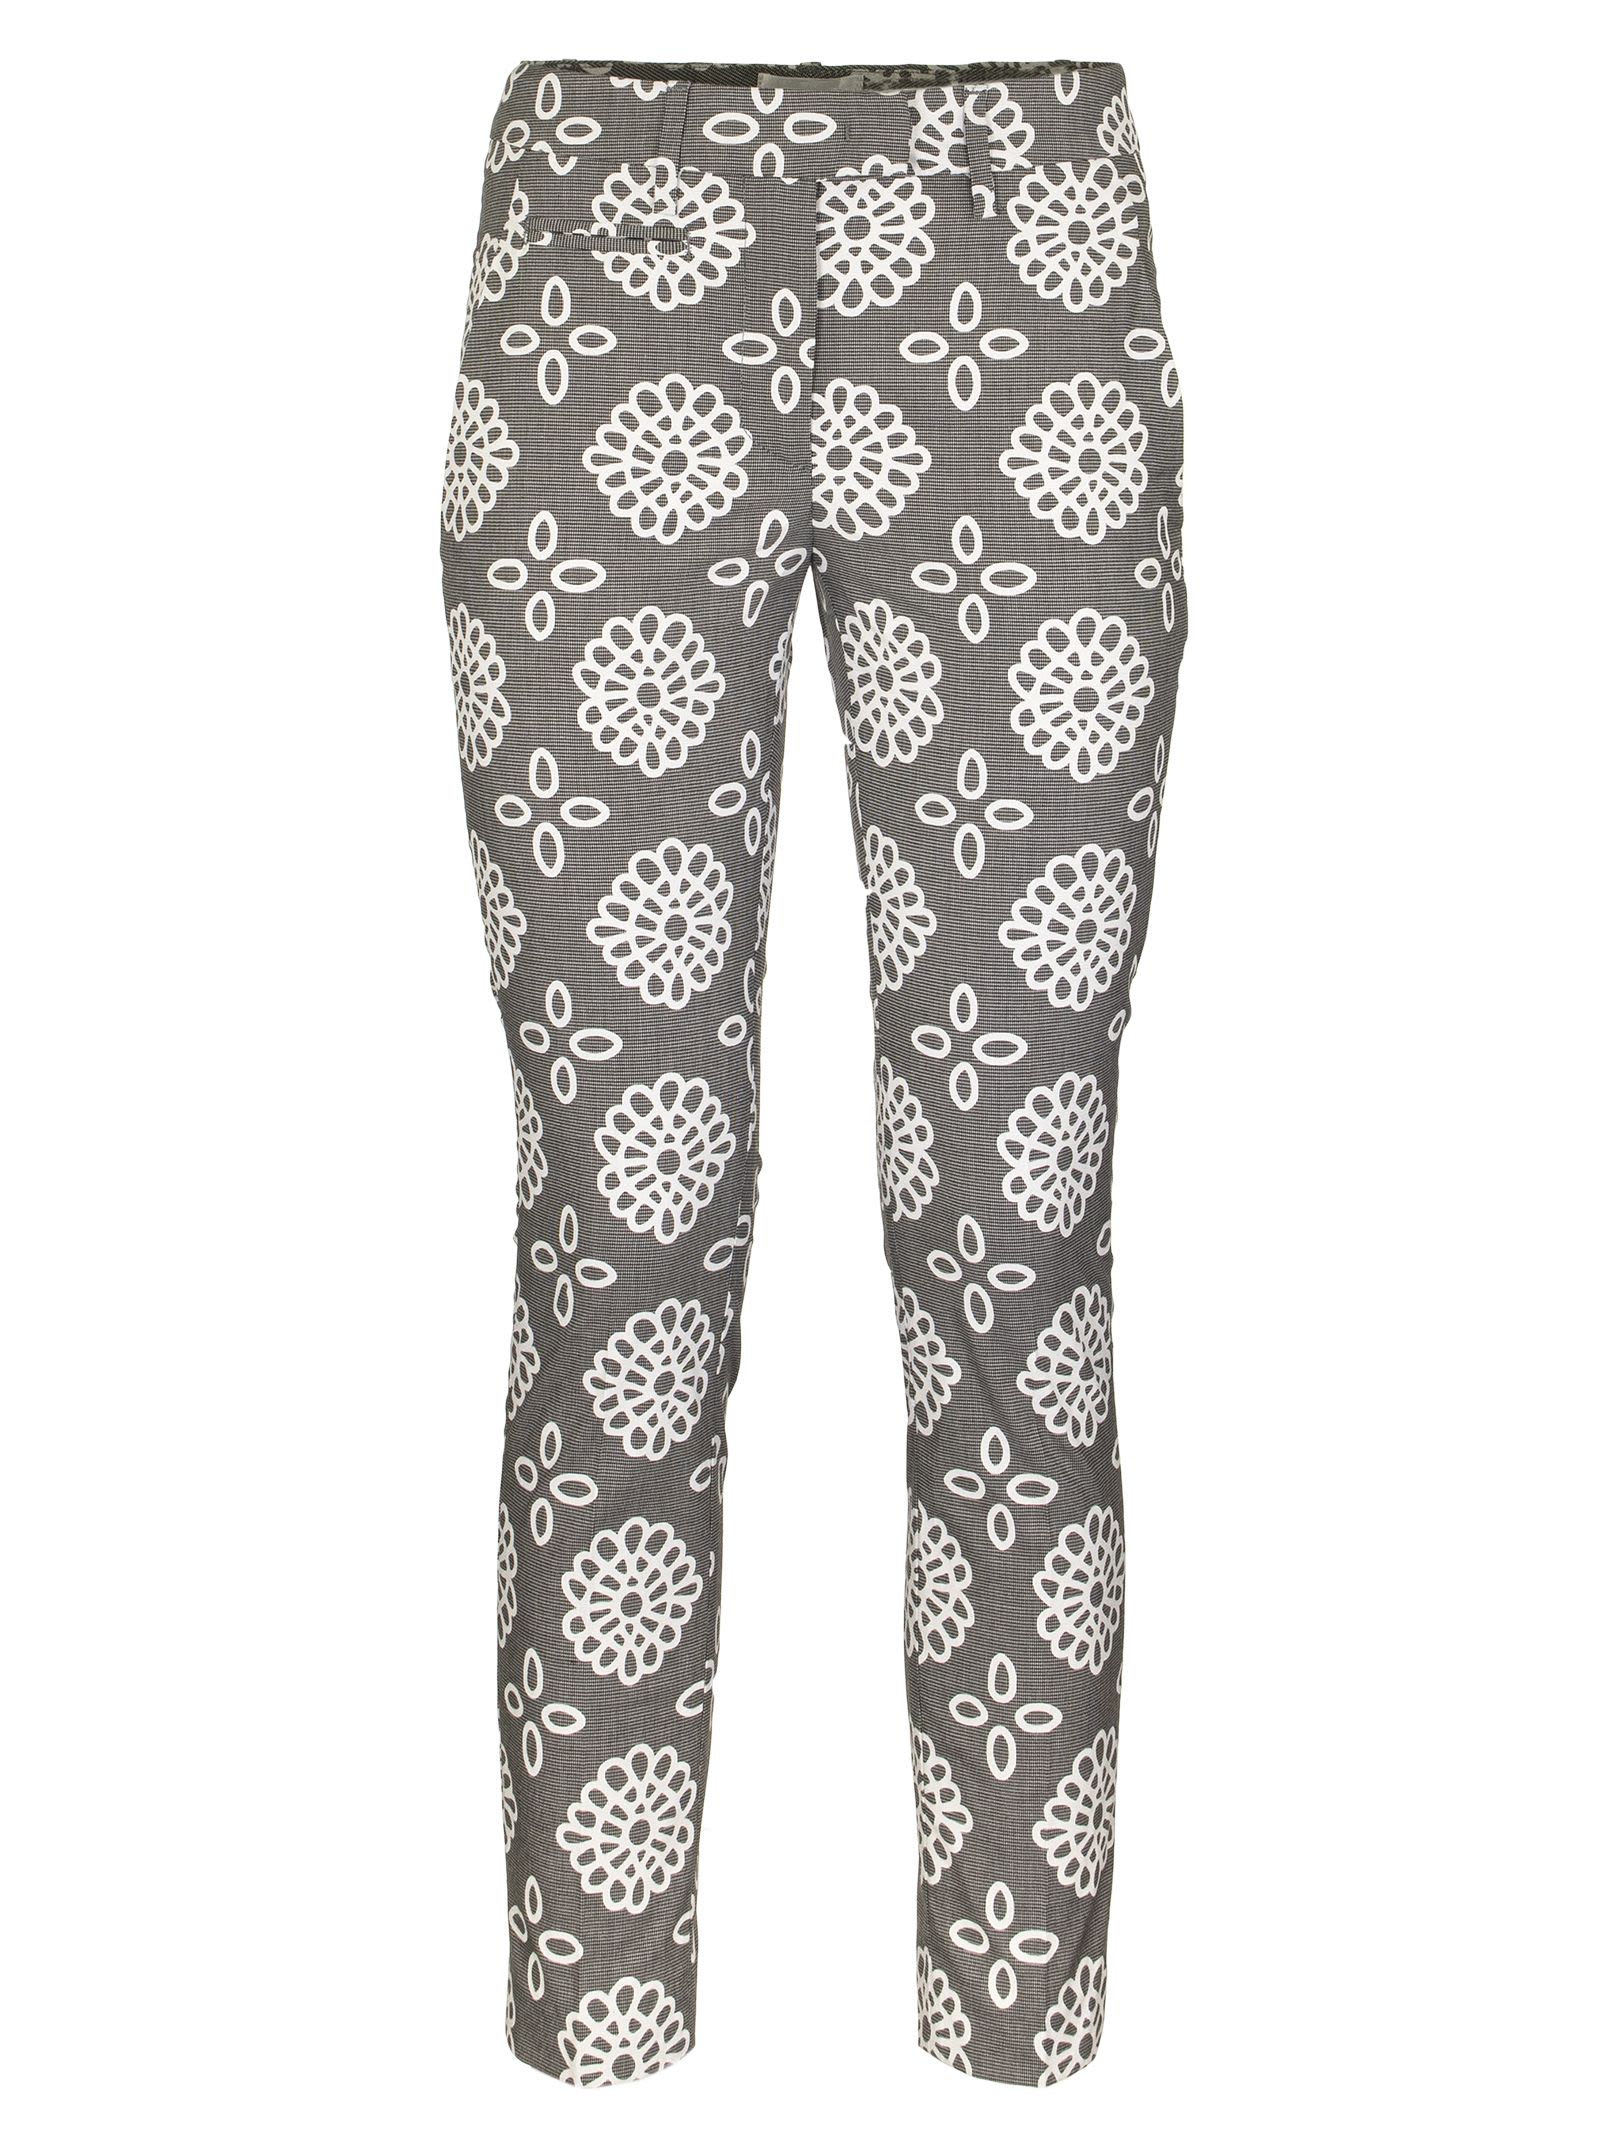 DONDUP PERFECT PATTERNED TROUSERS,11256275